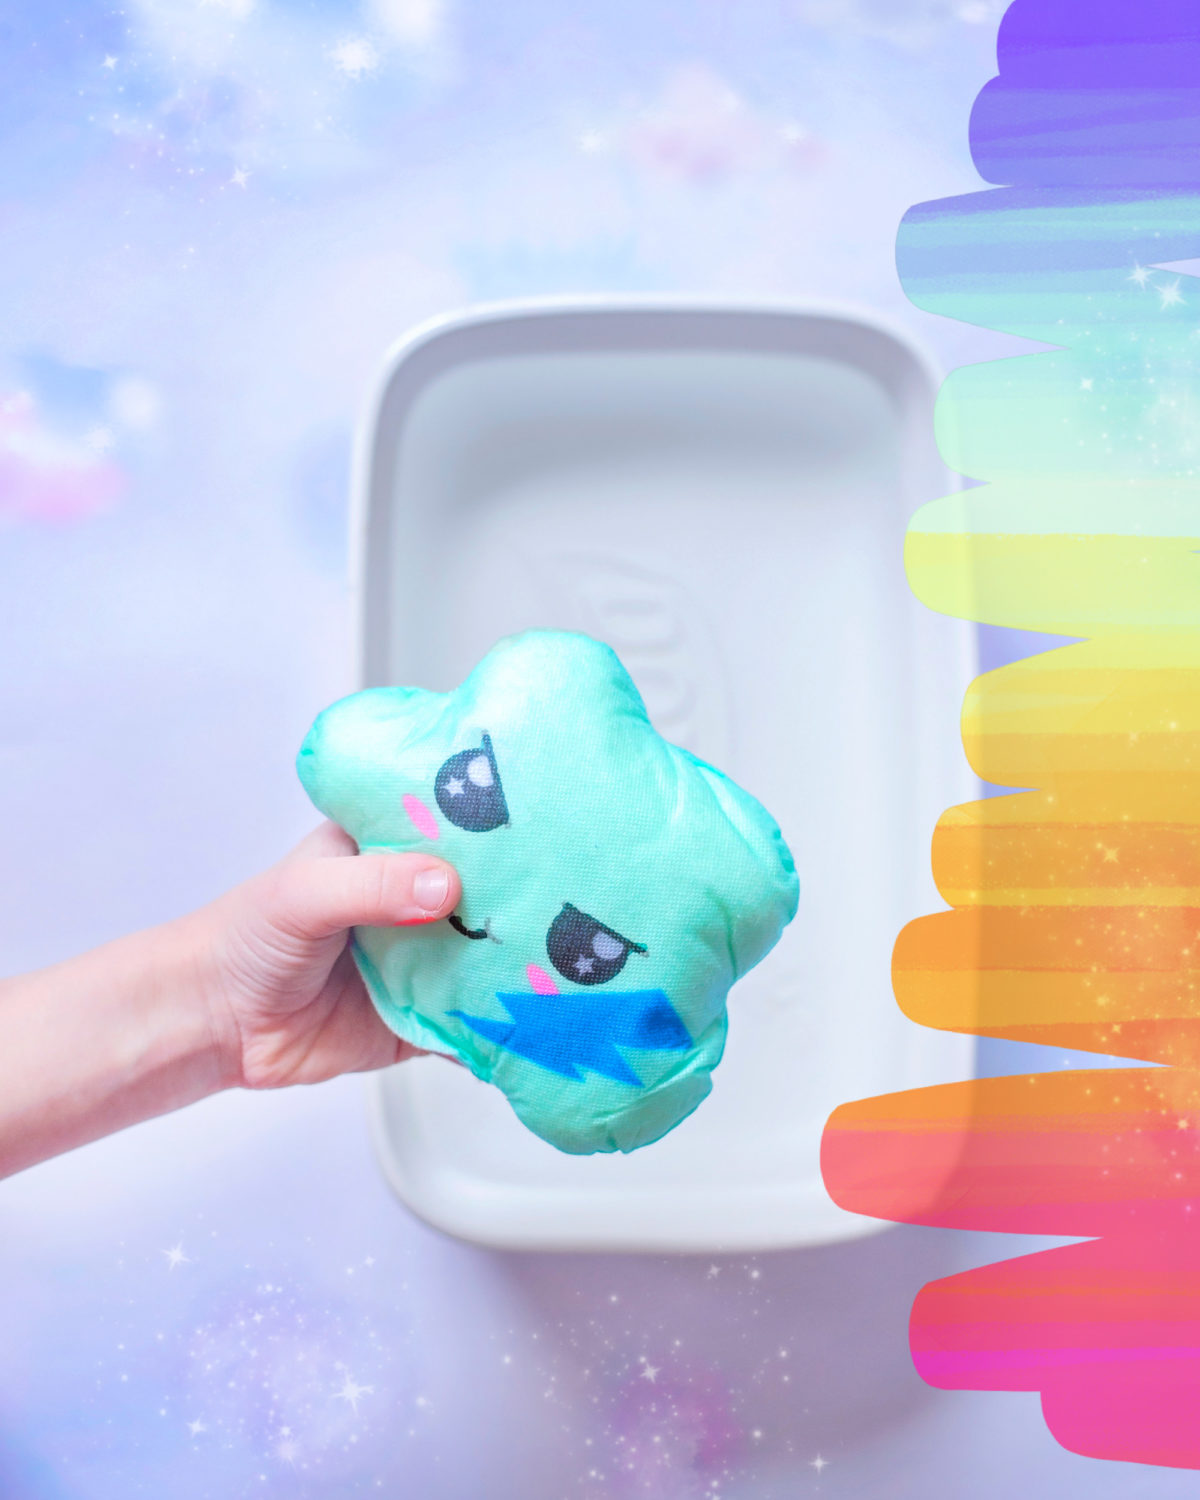 Uni-Verse Surprise Clouds ready to be dissolved in warm water to reveal unicorn and accessories